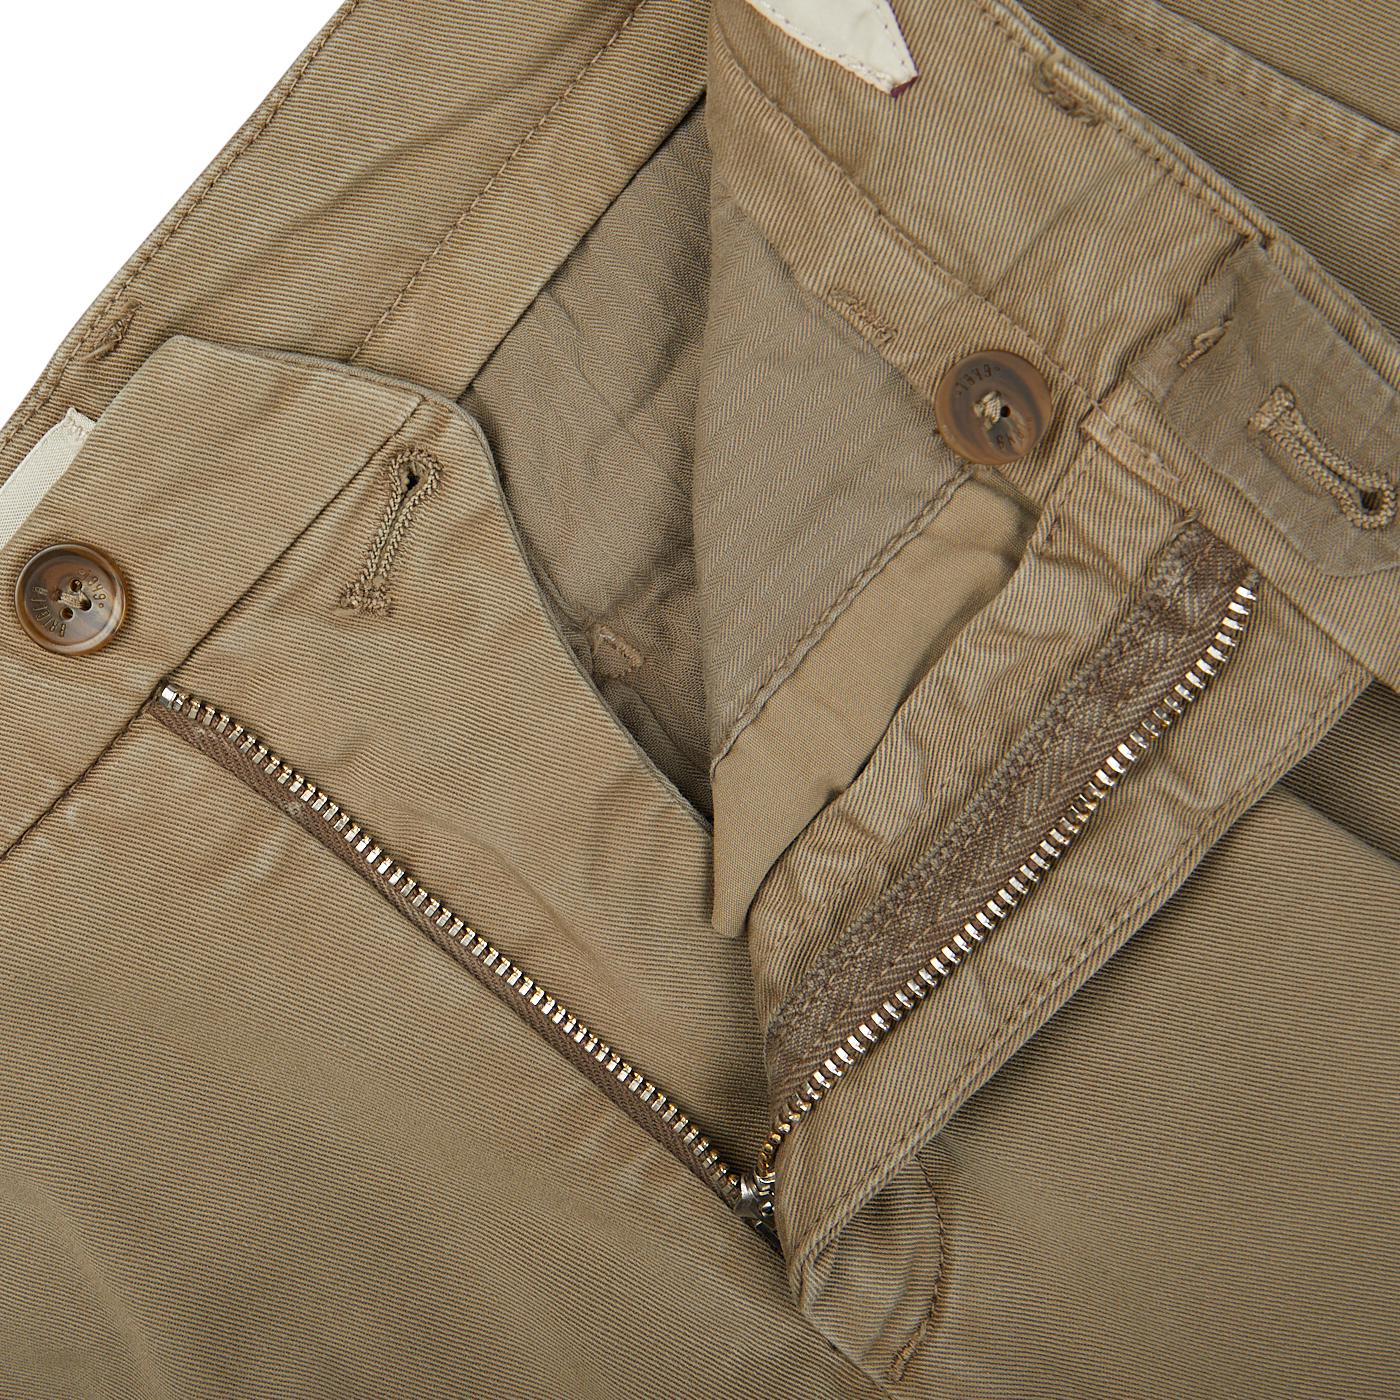 A close up of Briglia's Olive Green Cotton Stretch BG62 Casual Chinos with zippers.